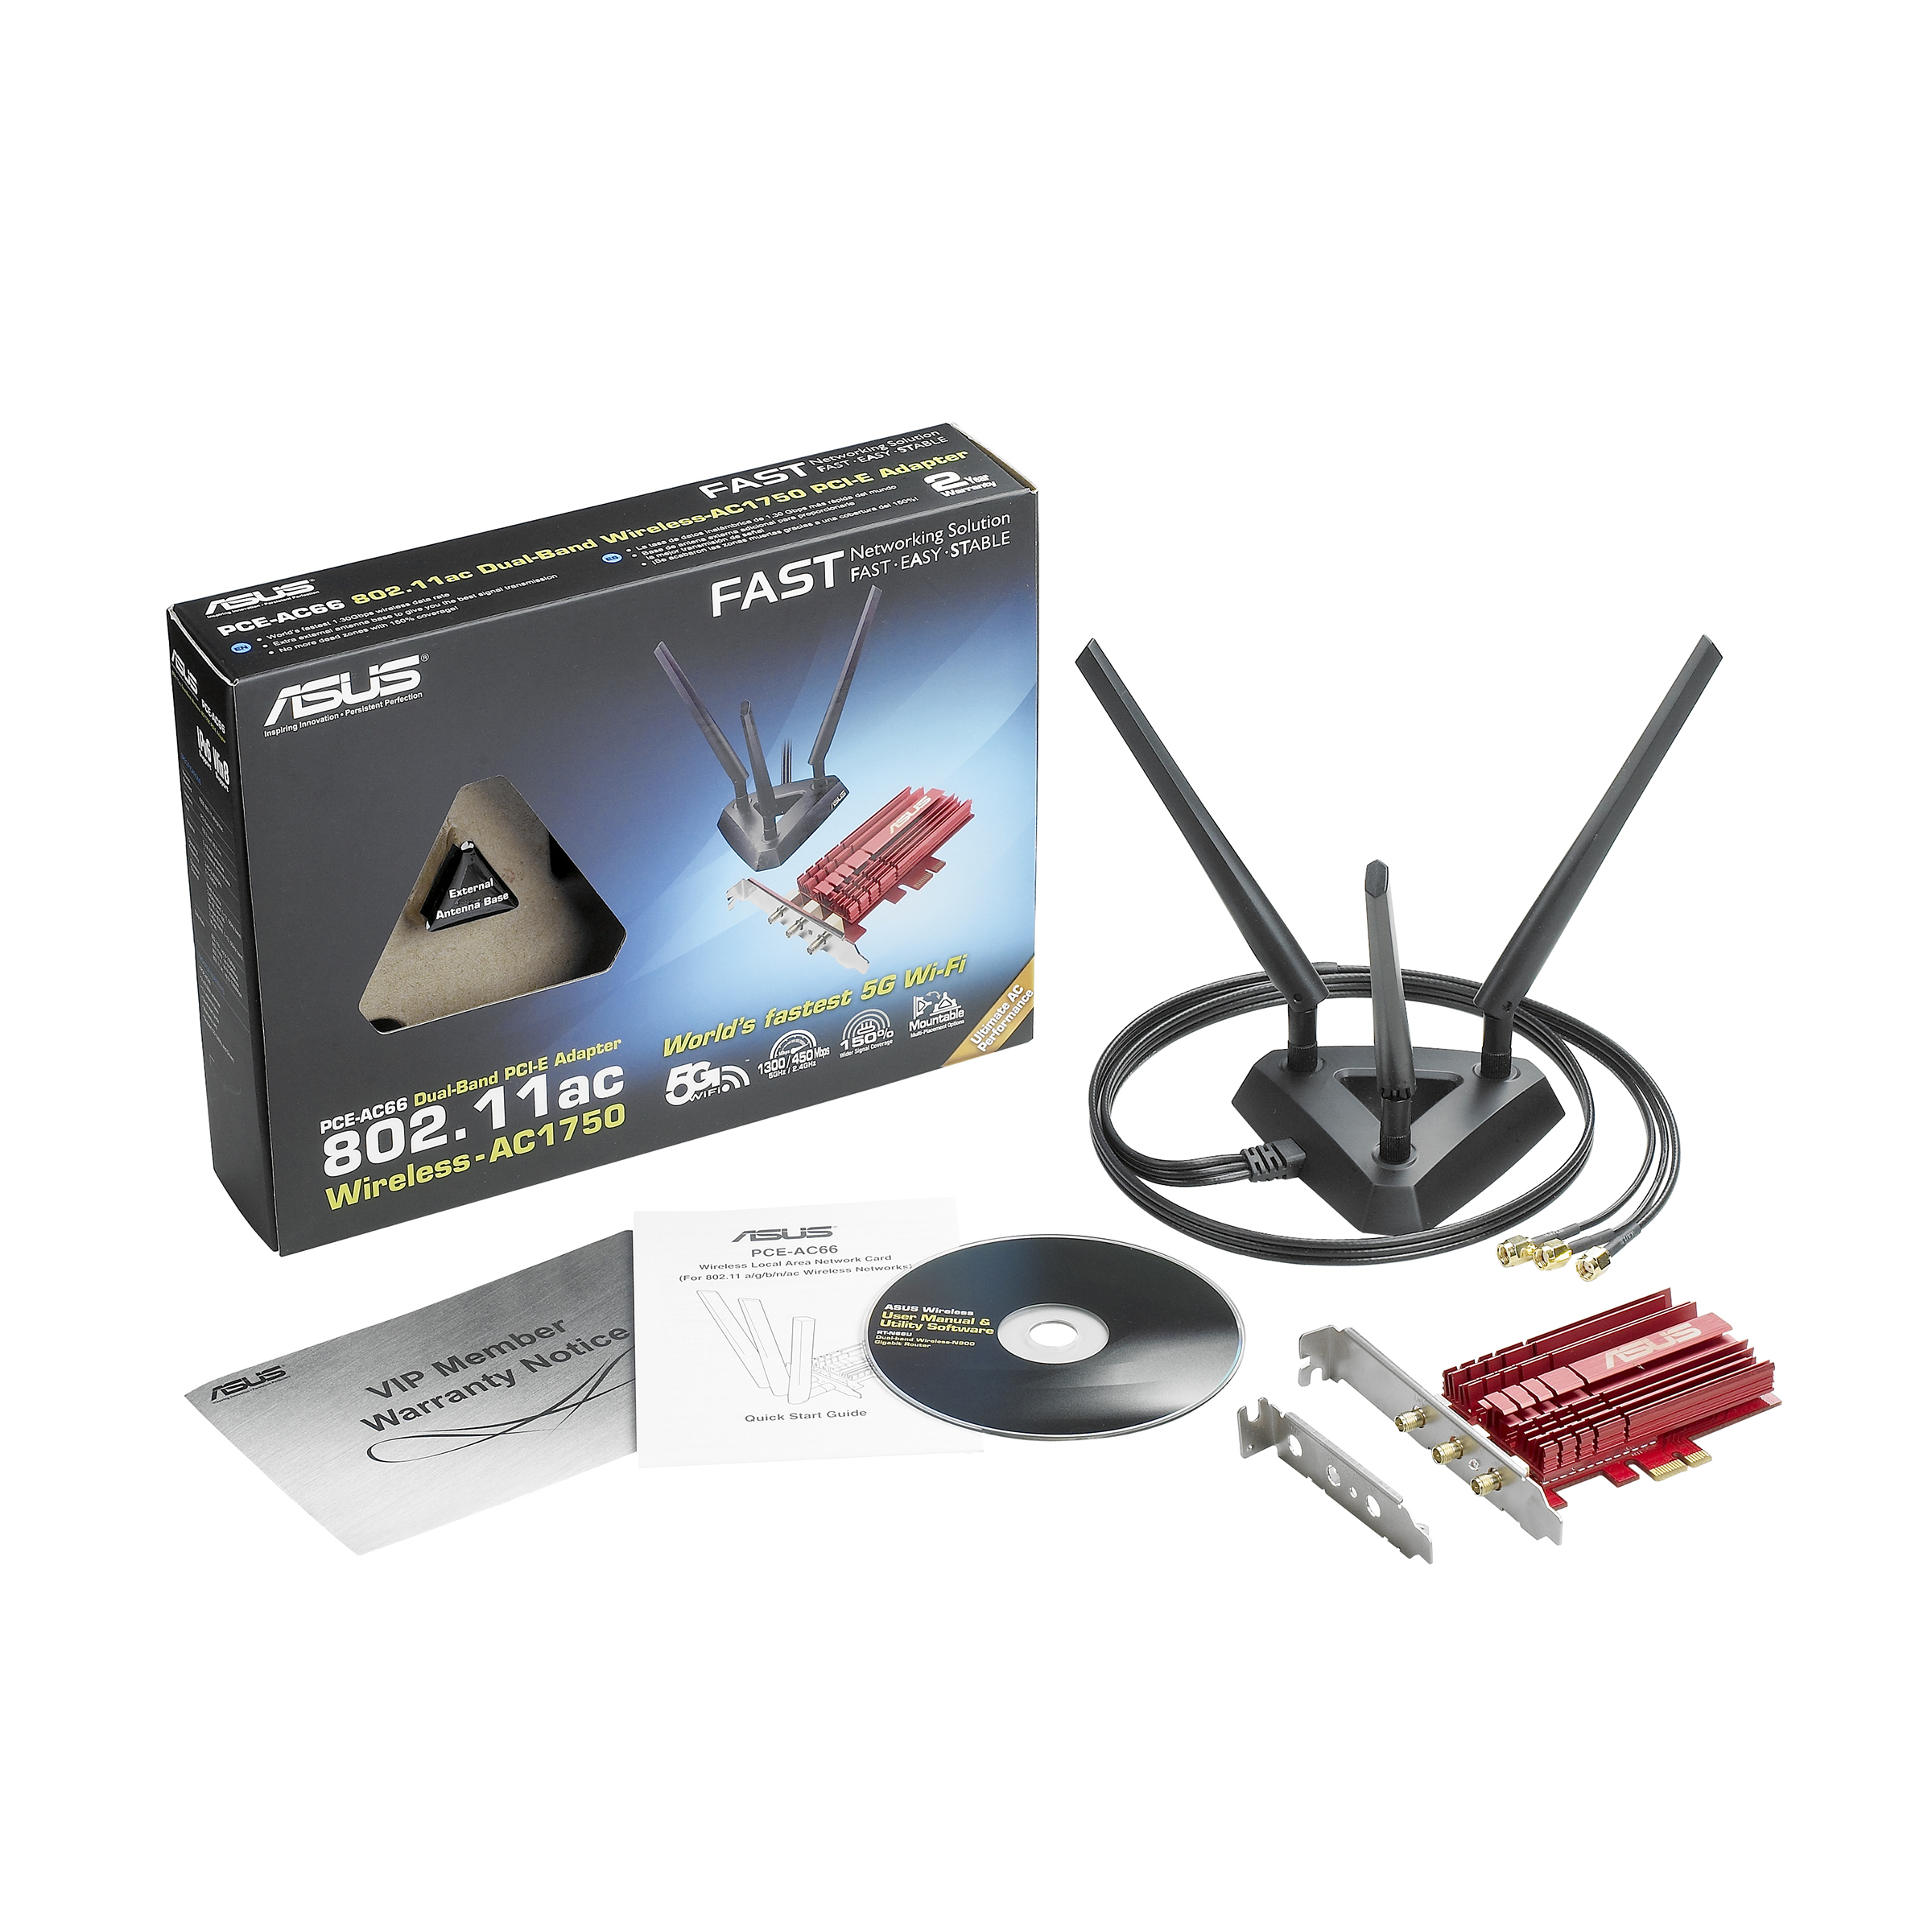 PCE-AC68｜Wireless Wired Adapters｜ASUS USA